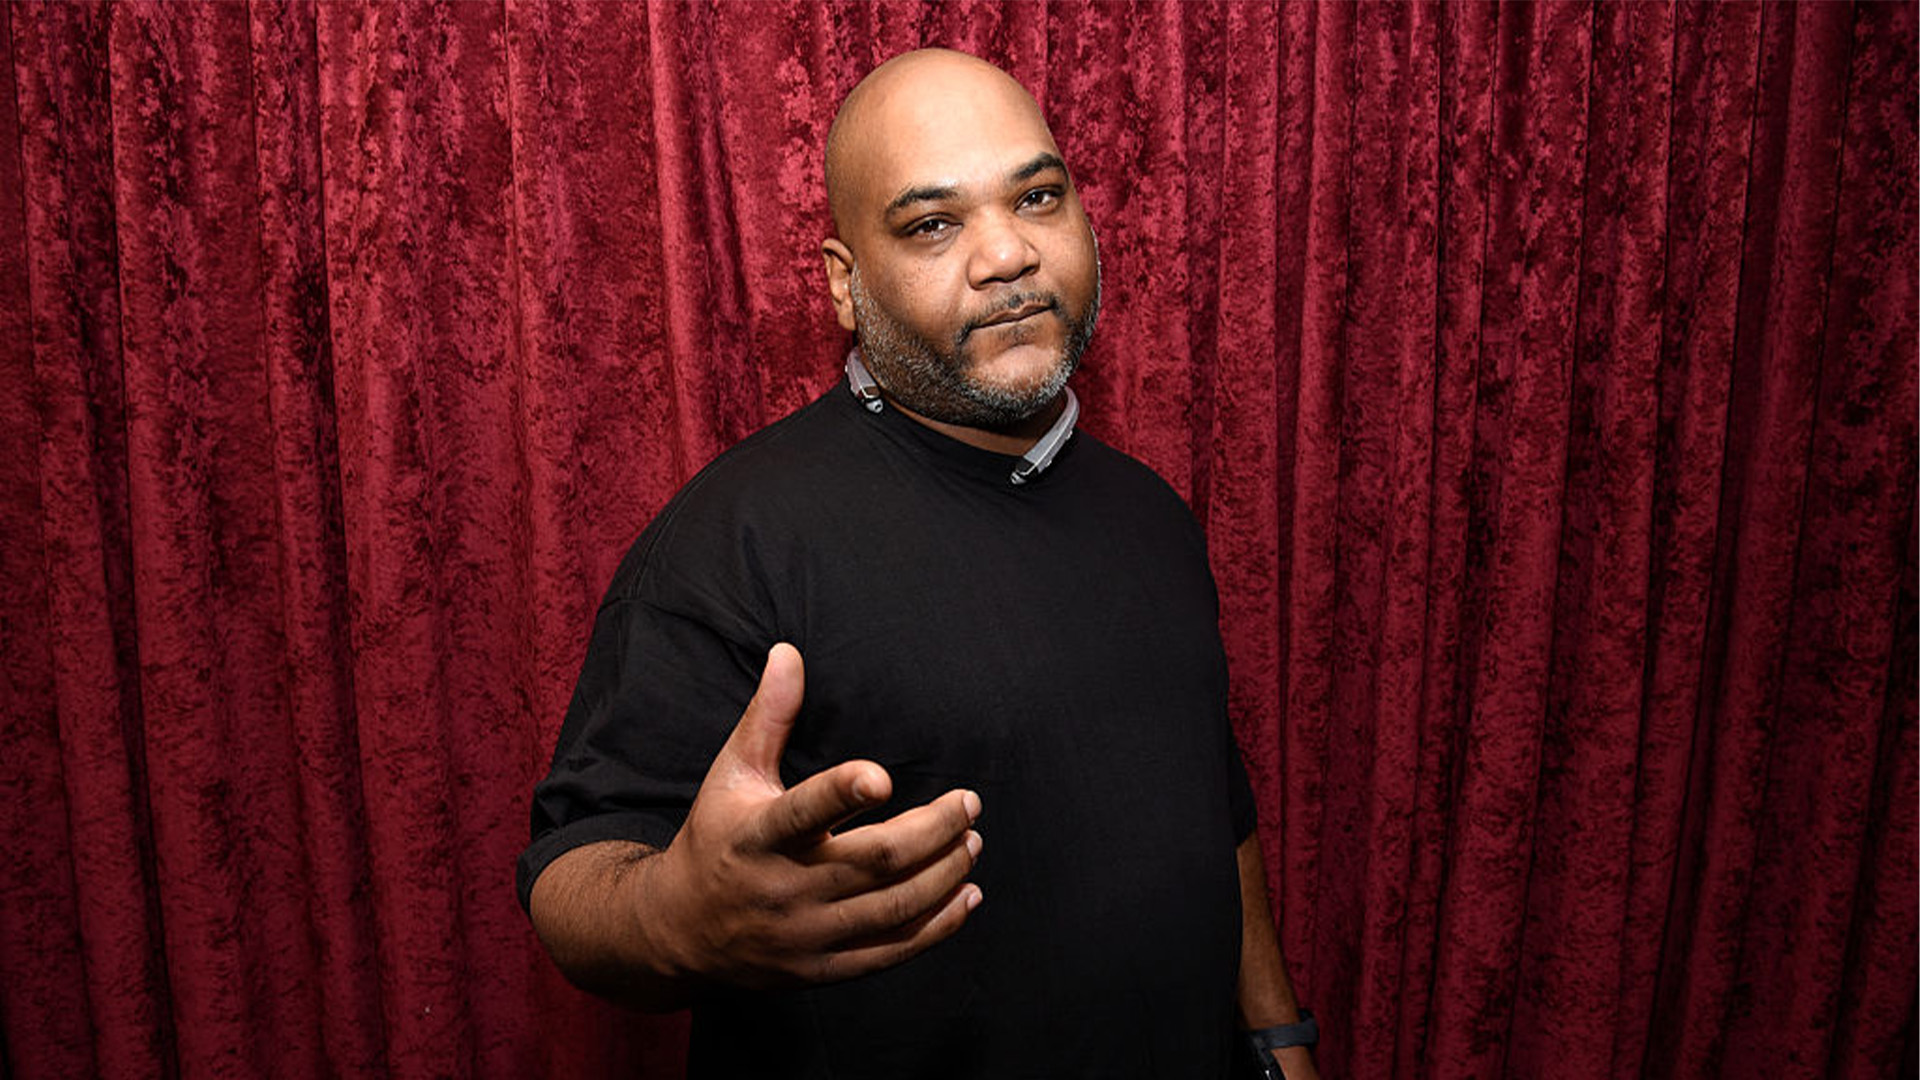 De La Soul's Vincent 'Maseo' Mason Says He 'Almost Buckled A Few Times' While Trying To Reclaim Their Music Catalog